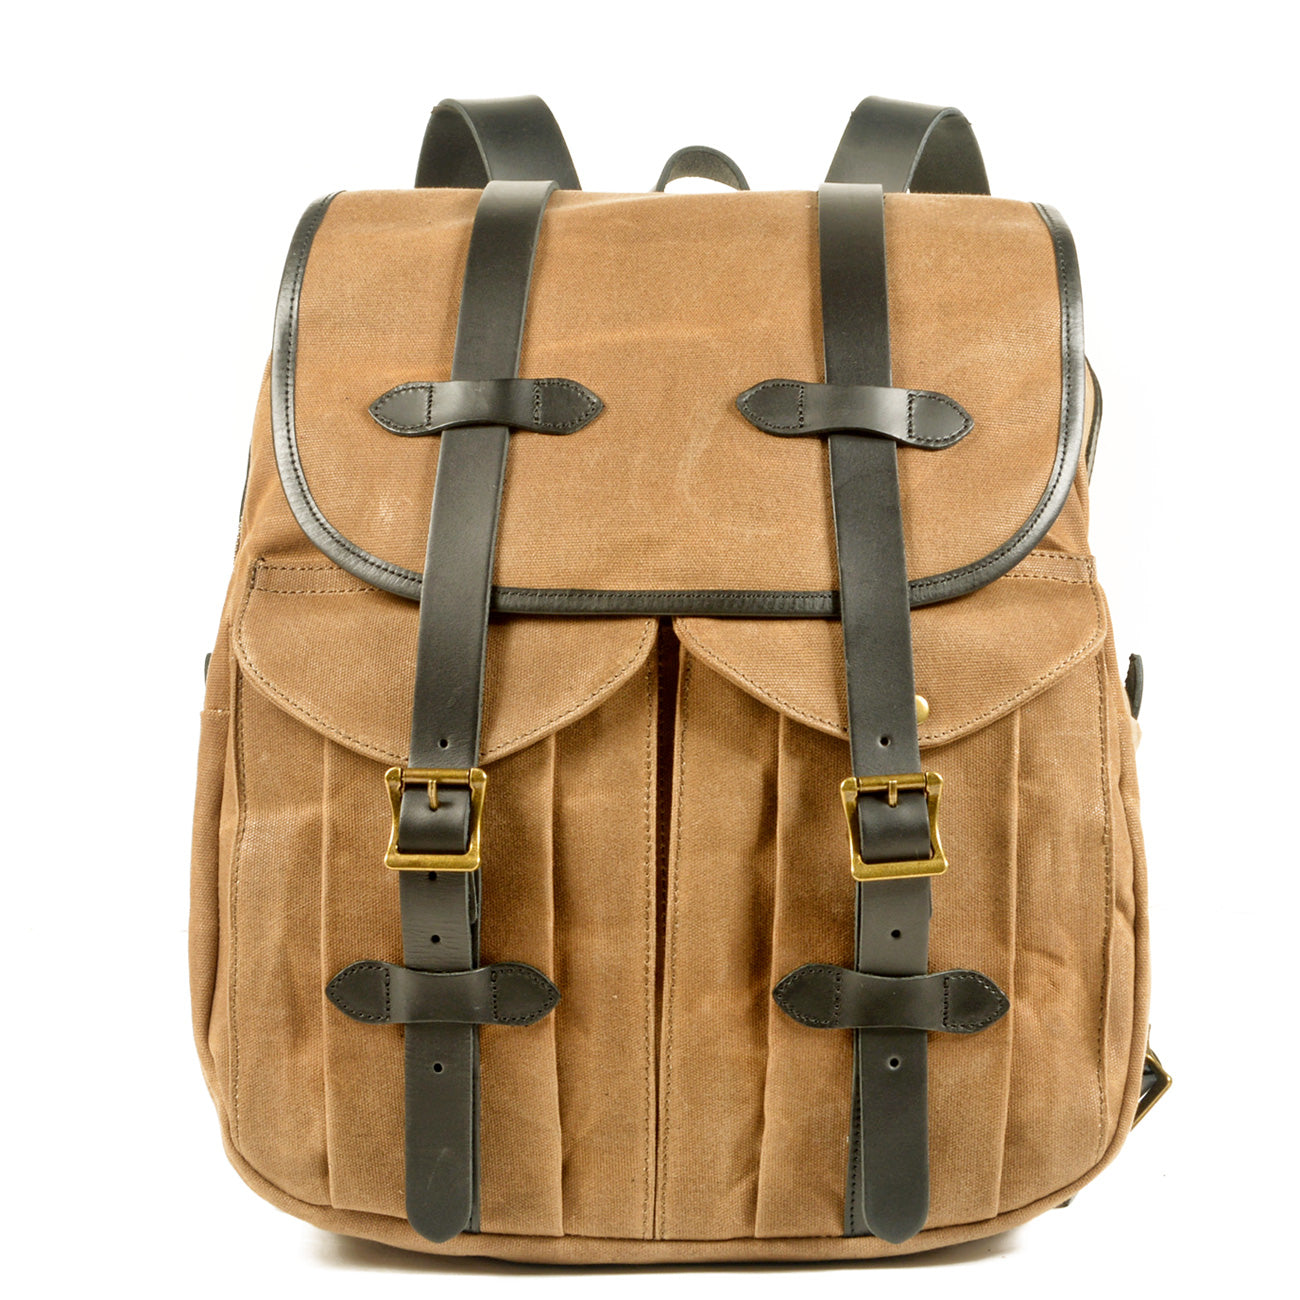 Vintage Waxed Canvas Leather Backpack 18L